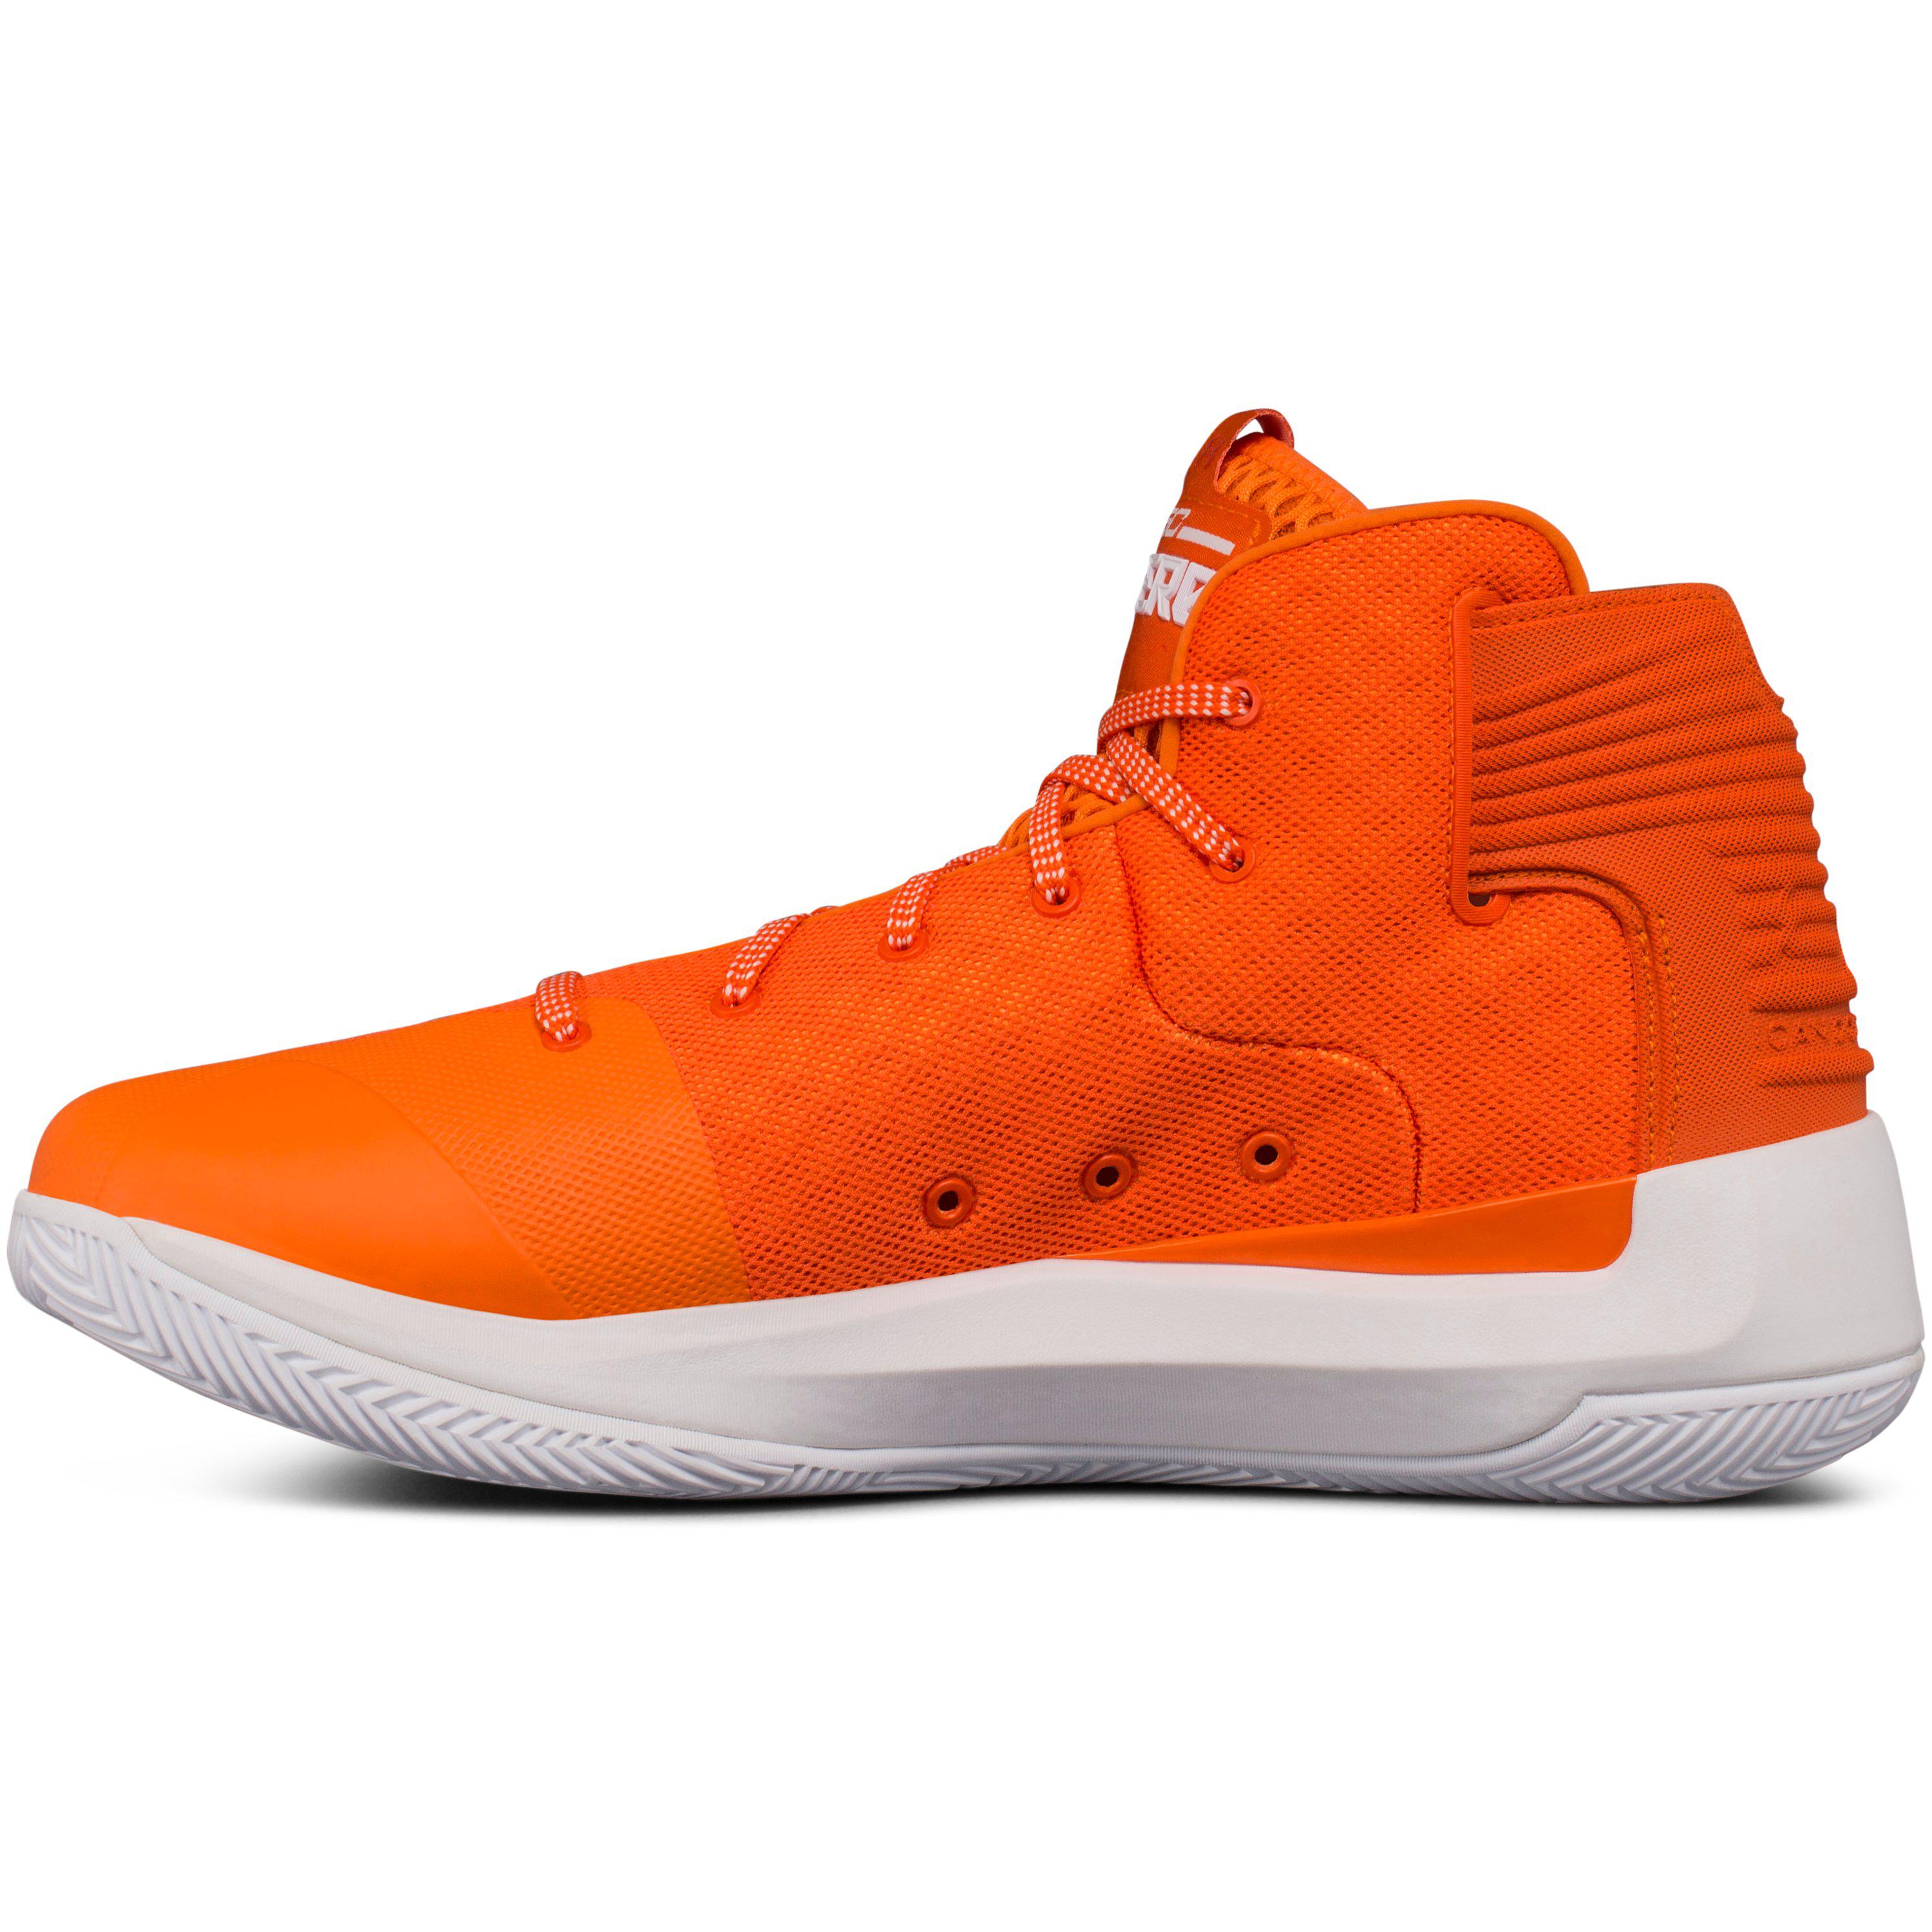 Under Armour Mens Curry 3zer0 Basketball Shoes